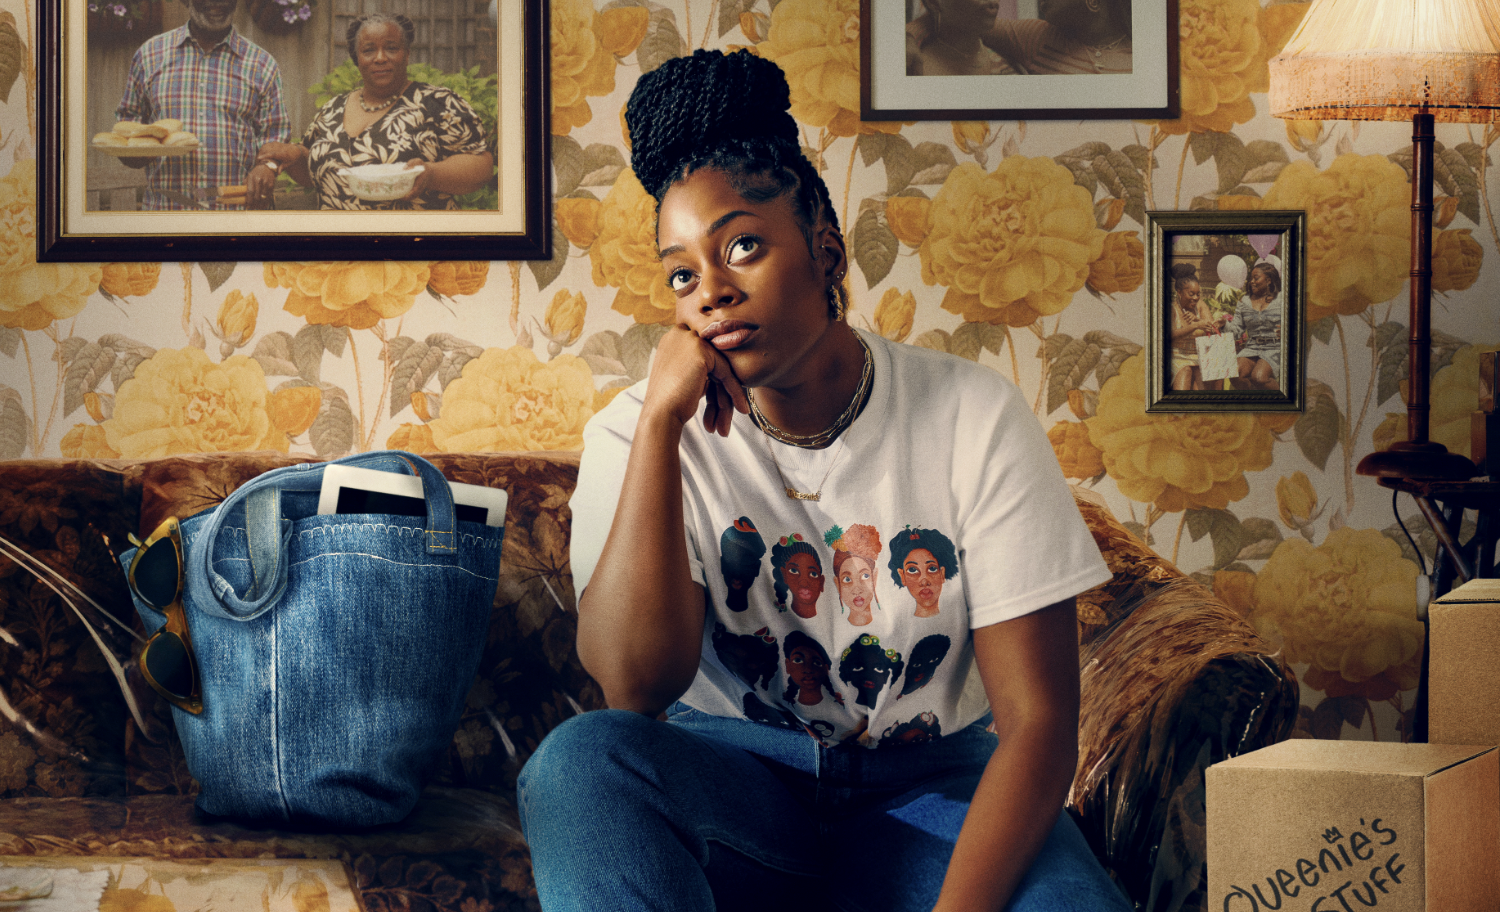 'Queenie' Trailer: Hulu's UK Series Sees A Jamaican British Woman Straddling Two Cultures